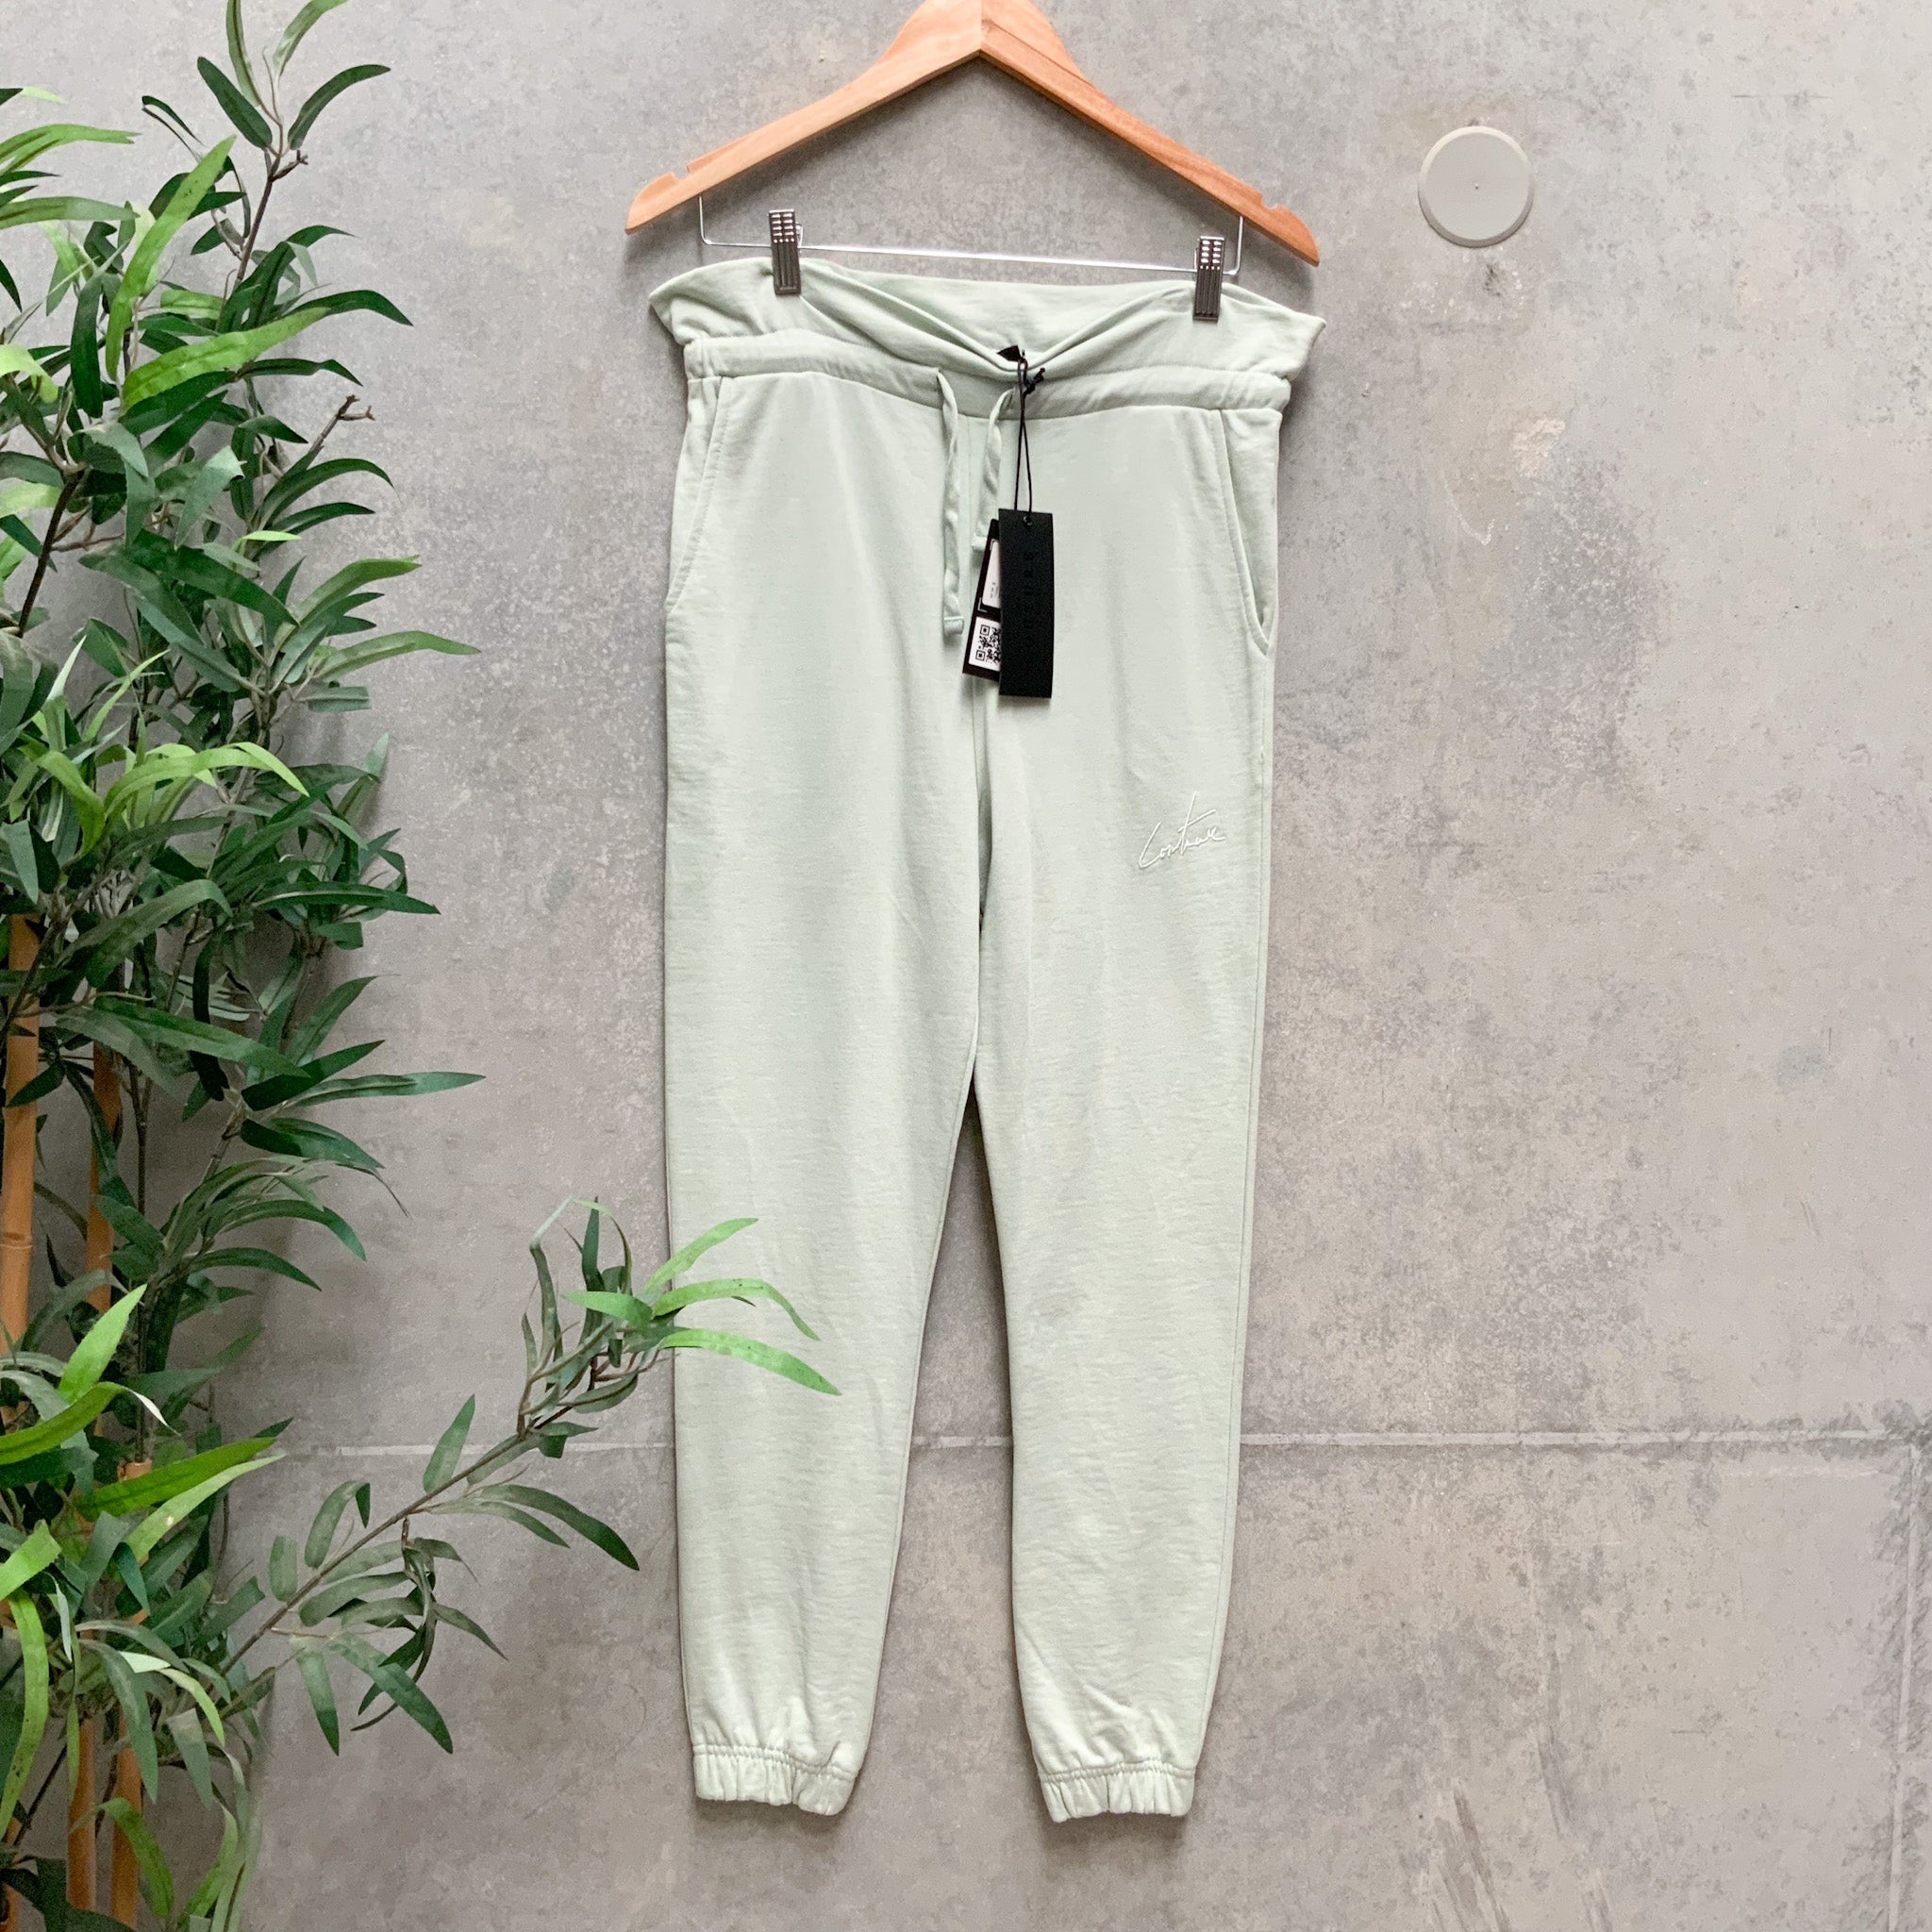 BNWT THE COUTURE CLUB Mint Paper bag Waist Cuffed Joggers - Size S